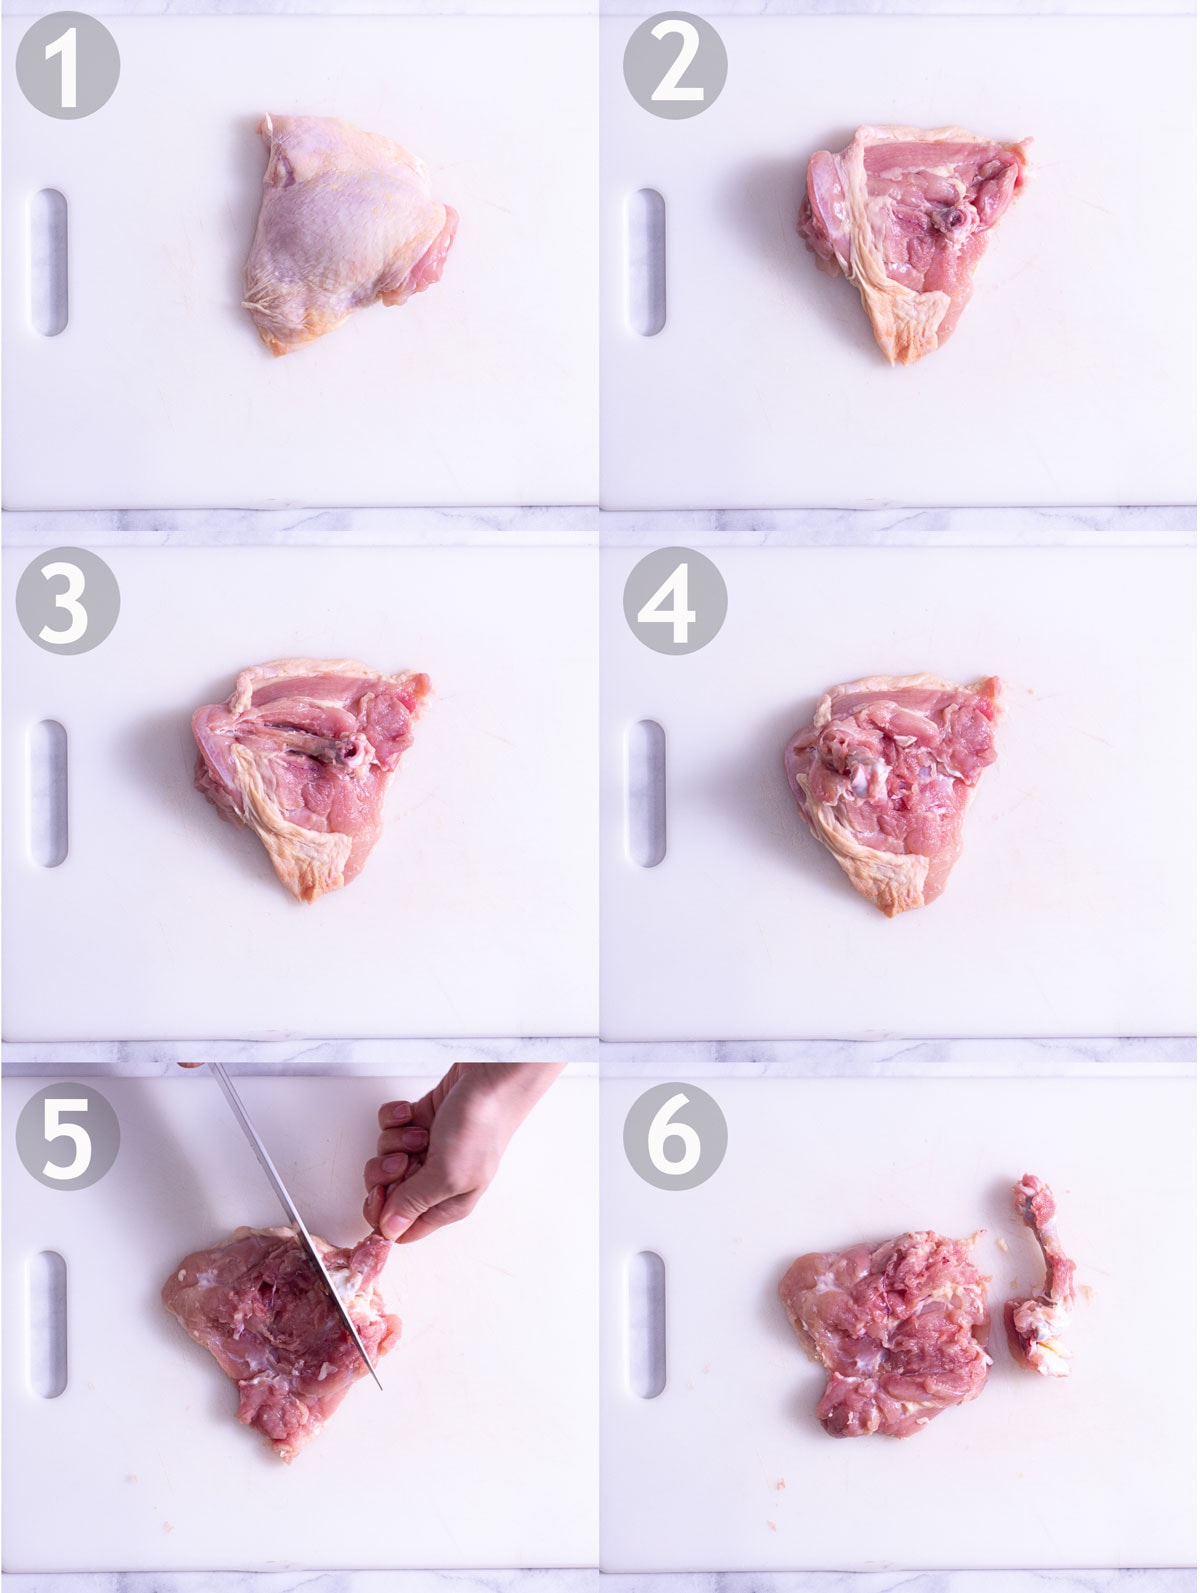 Step by step process of deboning a chicken thigh: make a slit in skin above bone, scrap flesh away from bone and cut away at joint.